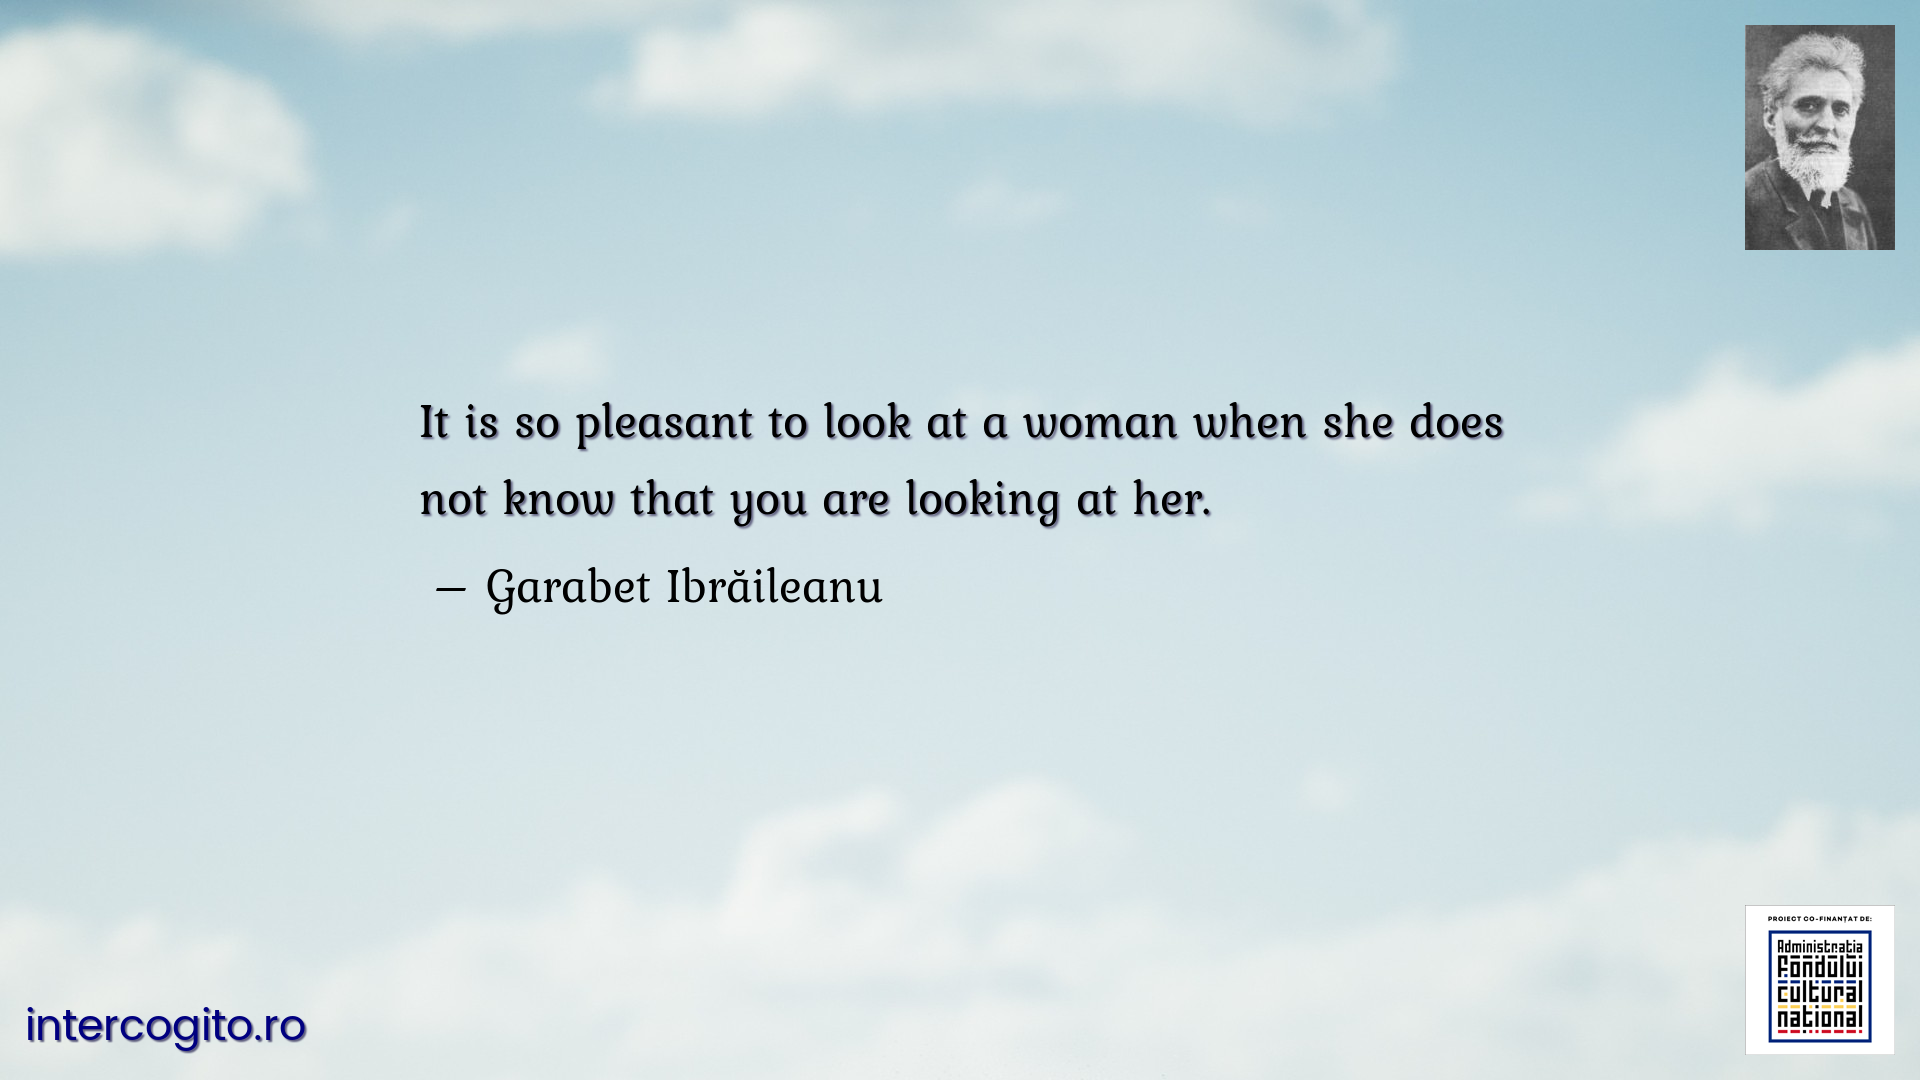 It is so pleasant to look at a woman when she does not know that you are looking at her.